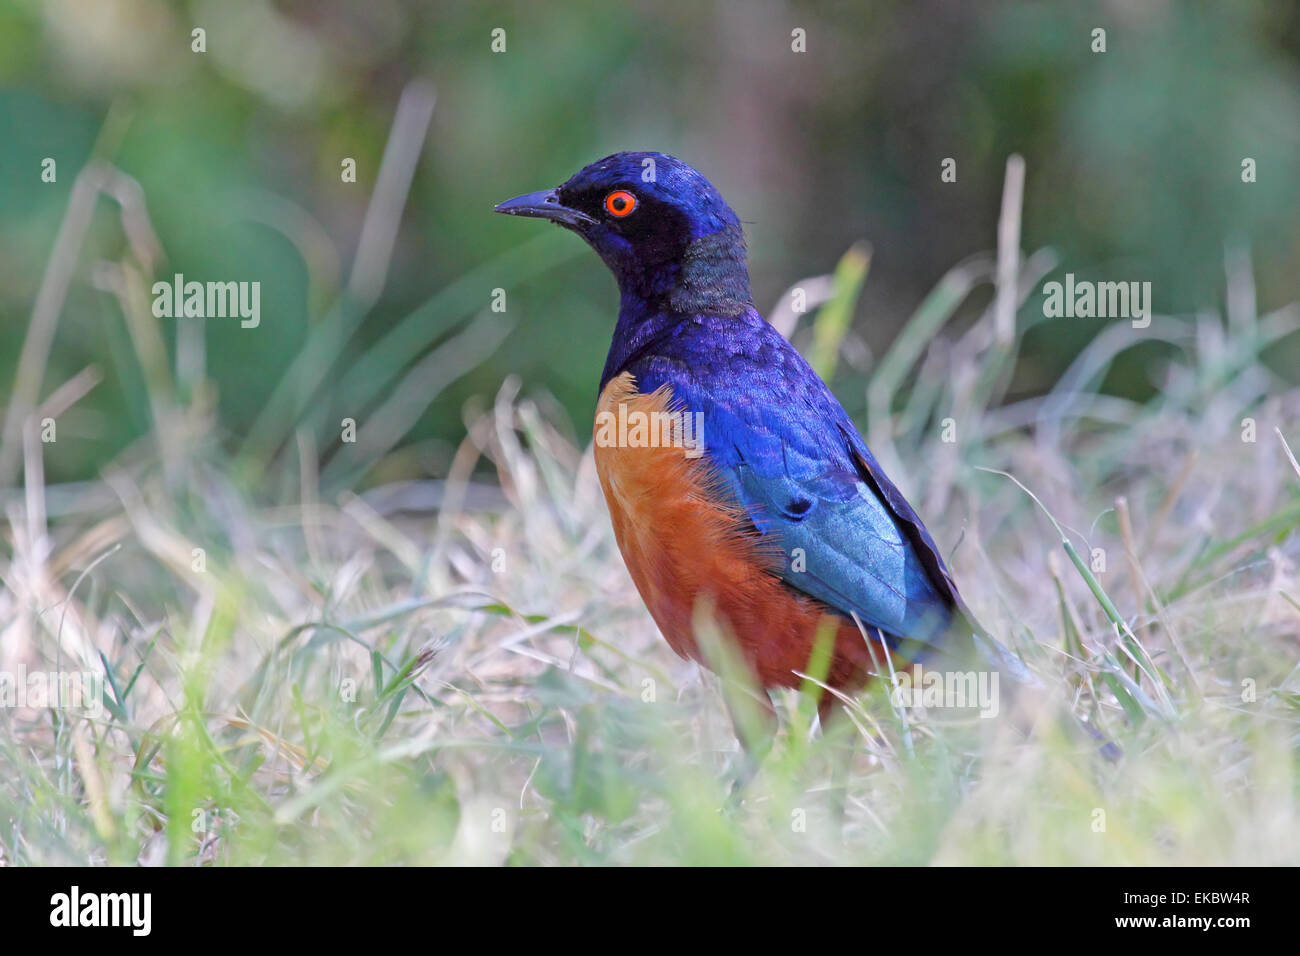 A colorful african bird known as superb starling, Lamprotornis superbus, on the grass in Serengeti National Park, Tanzania Stock Photo